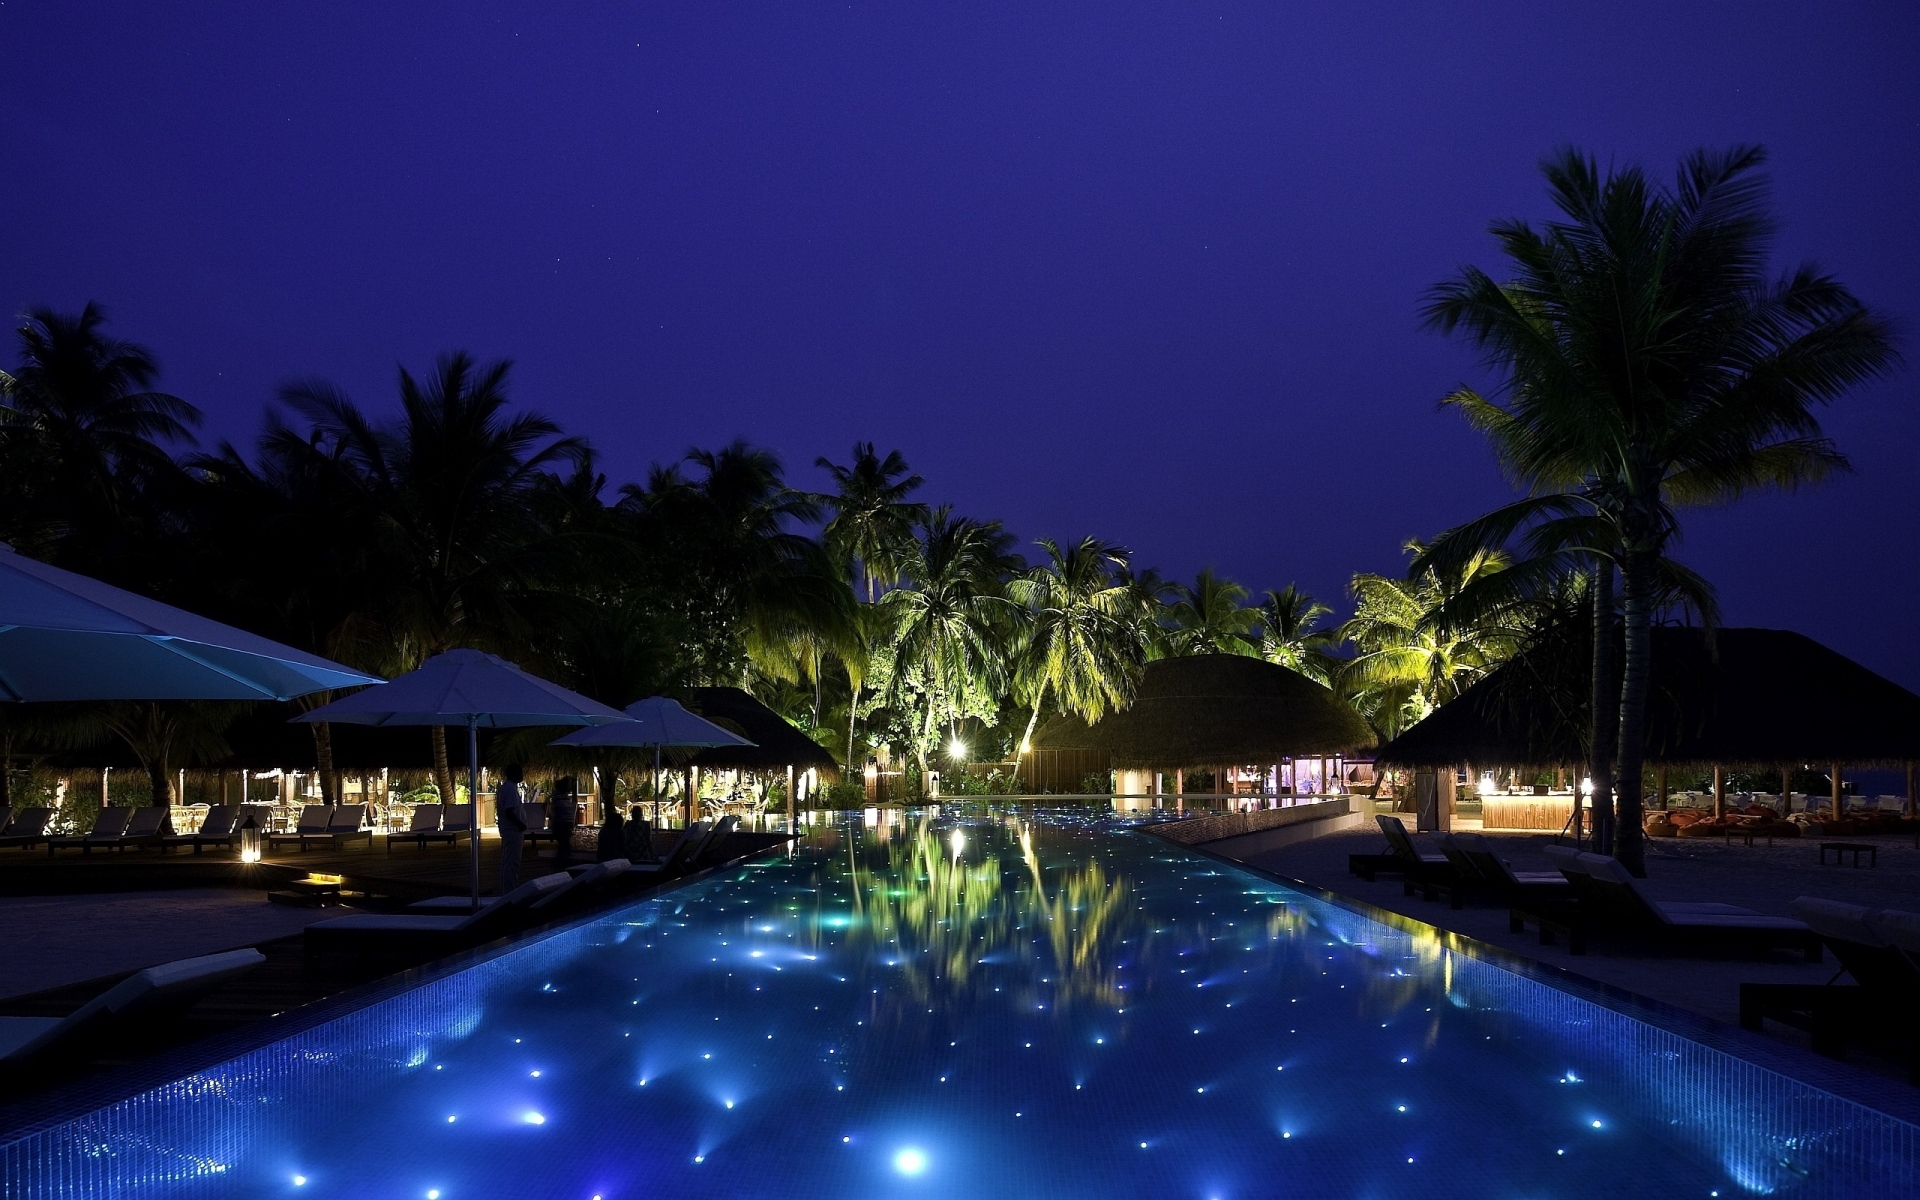 Resort Night View for 1920 x 1200 widescreen resolution